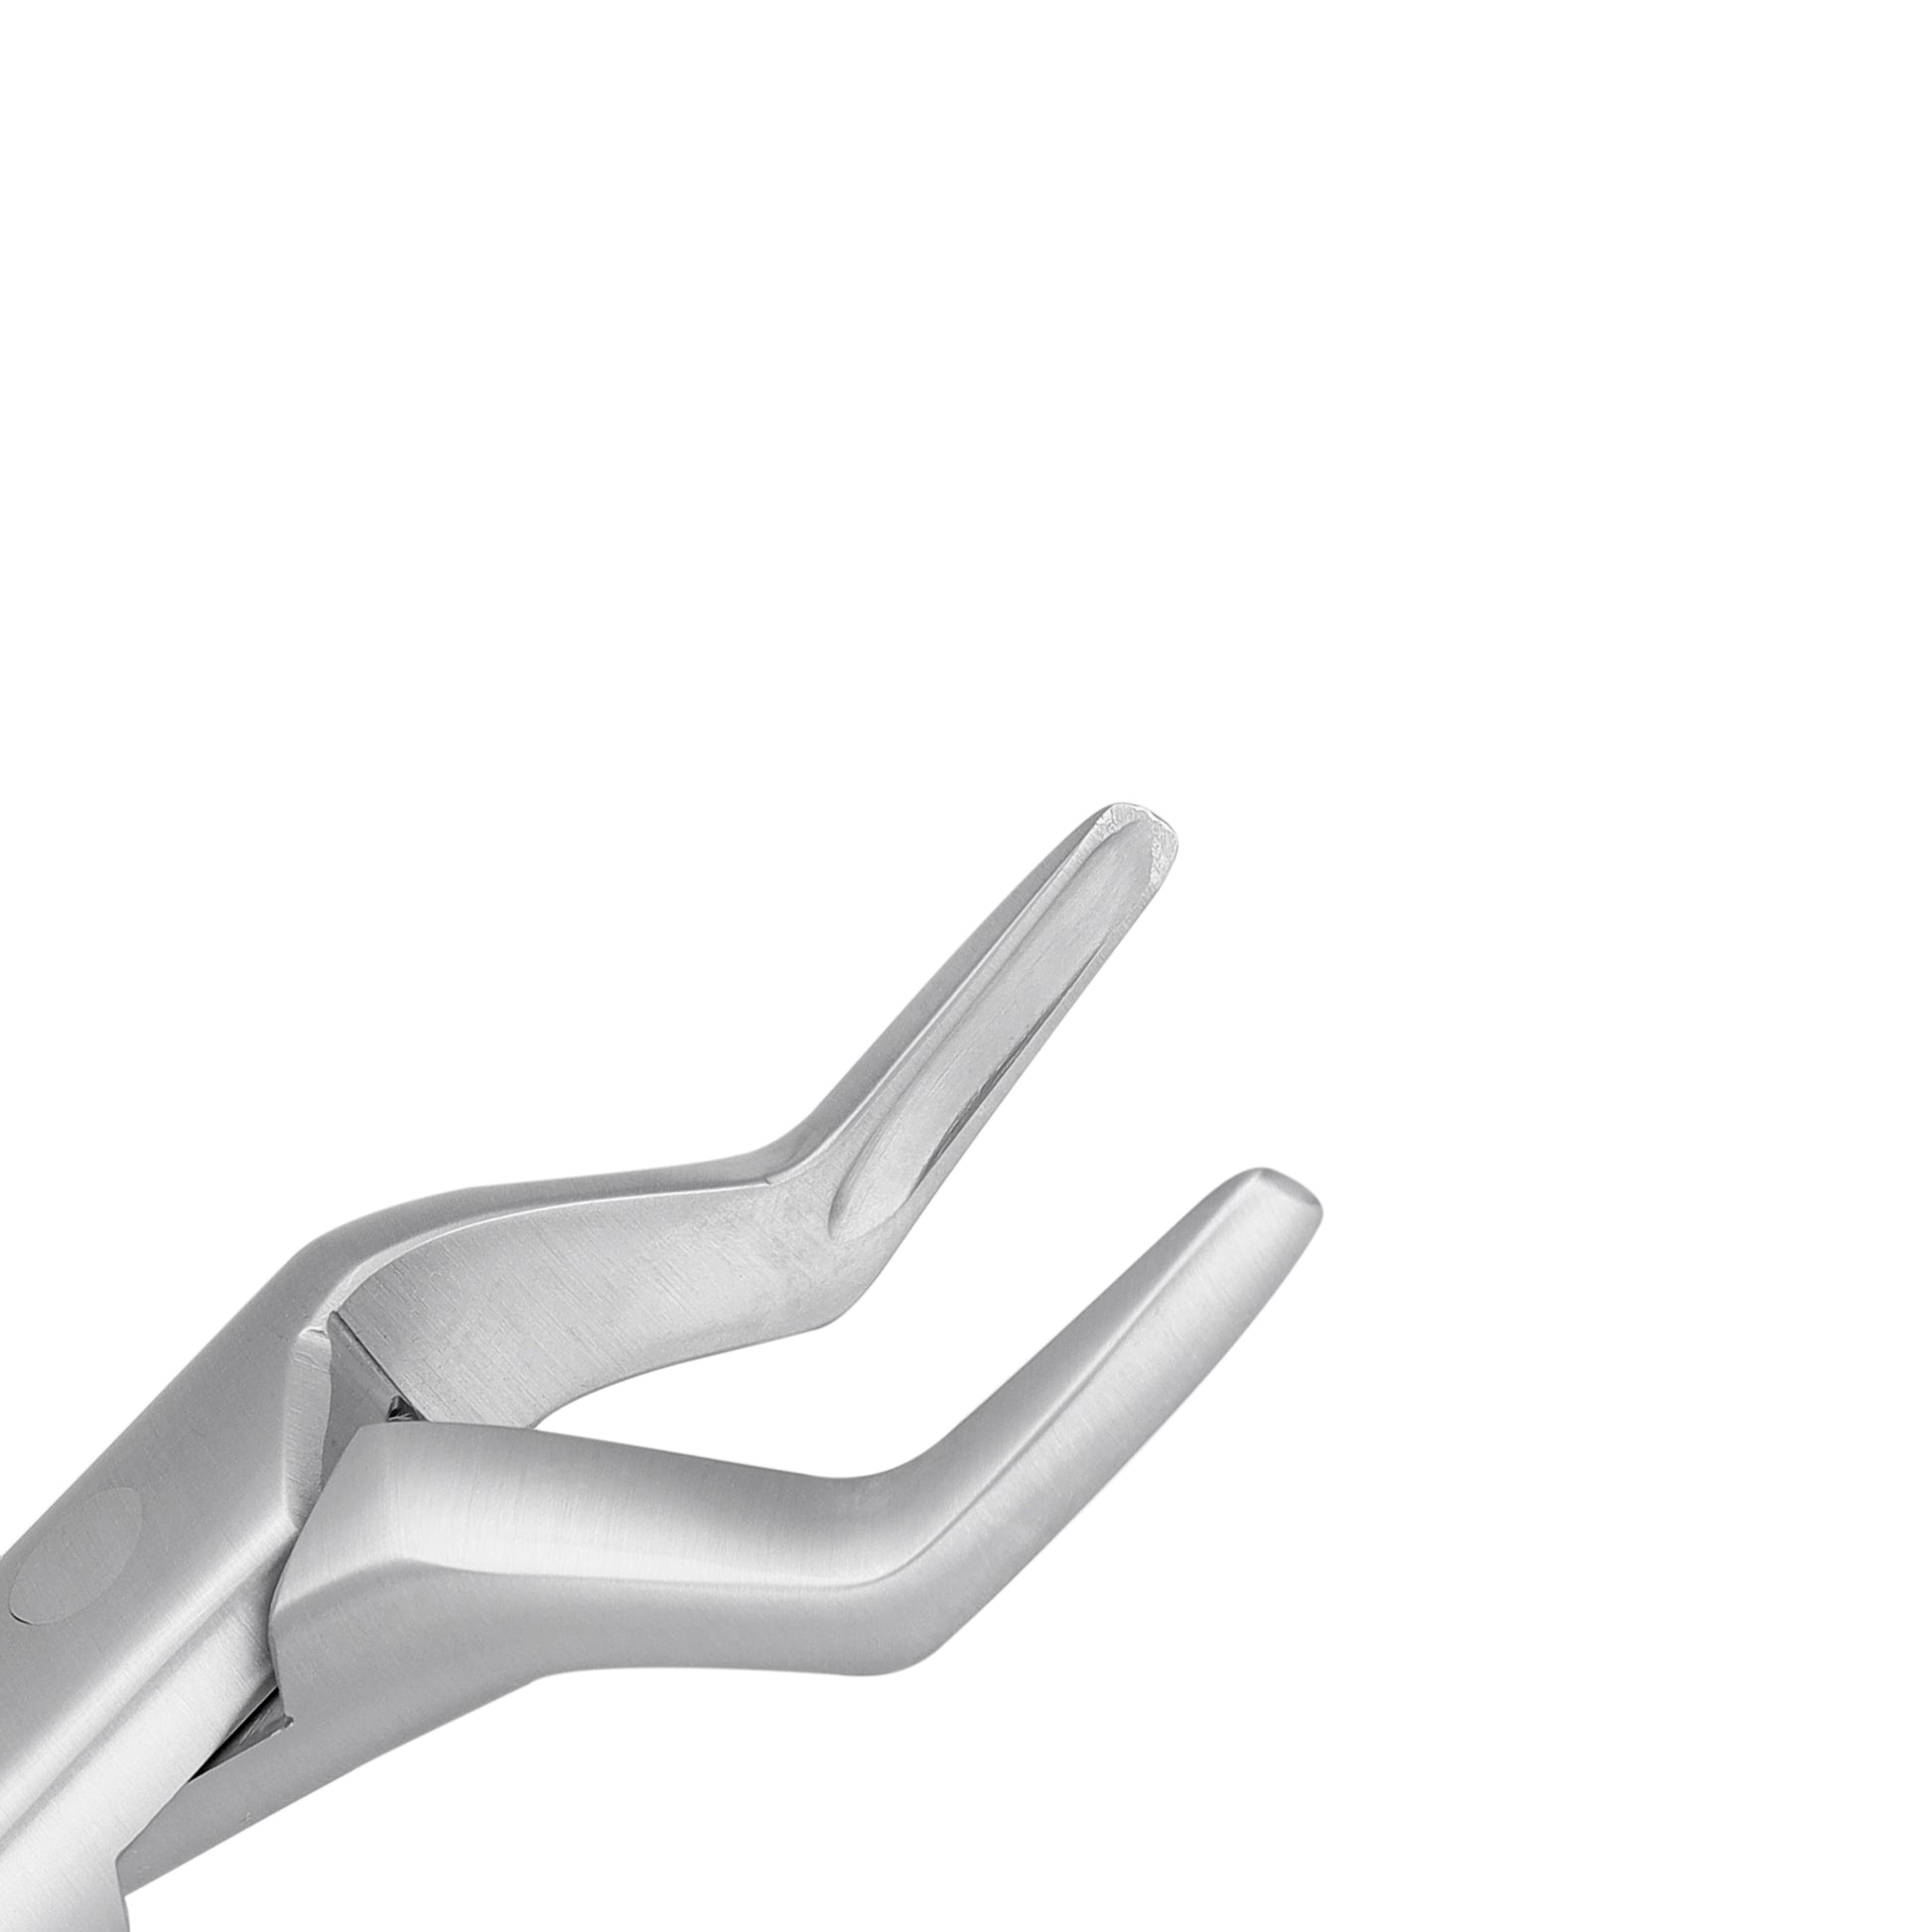 65 Upper Roots, Fragments & Overlapping Incisors Extraction Forceps - HiTeck Medical Instruments